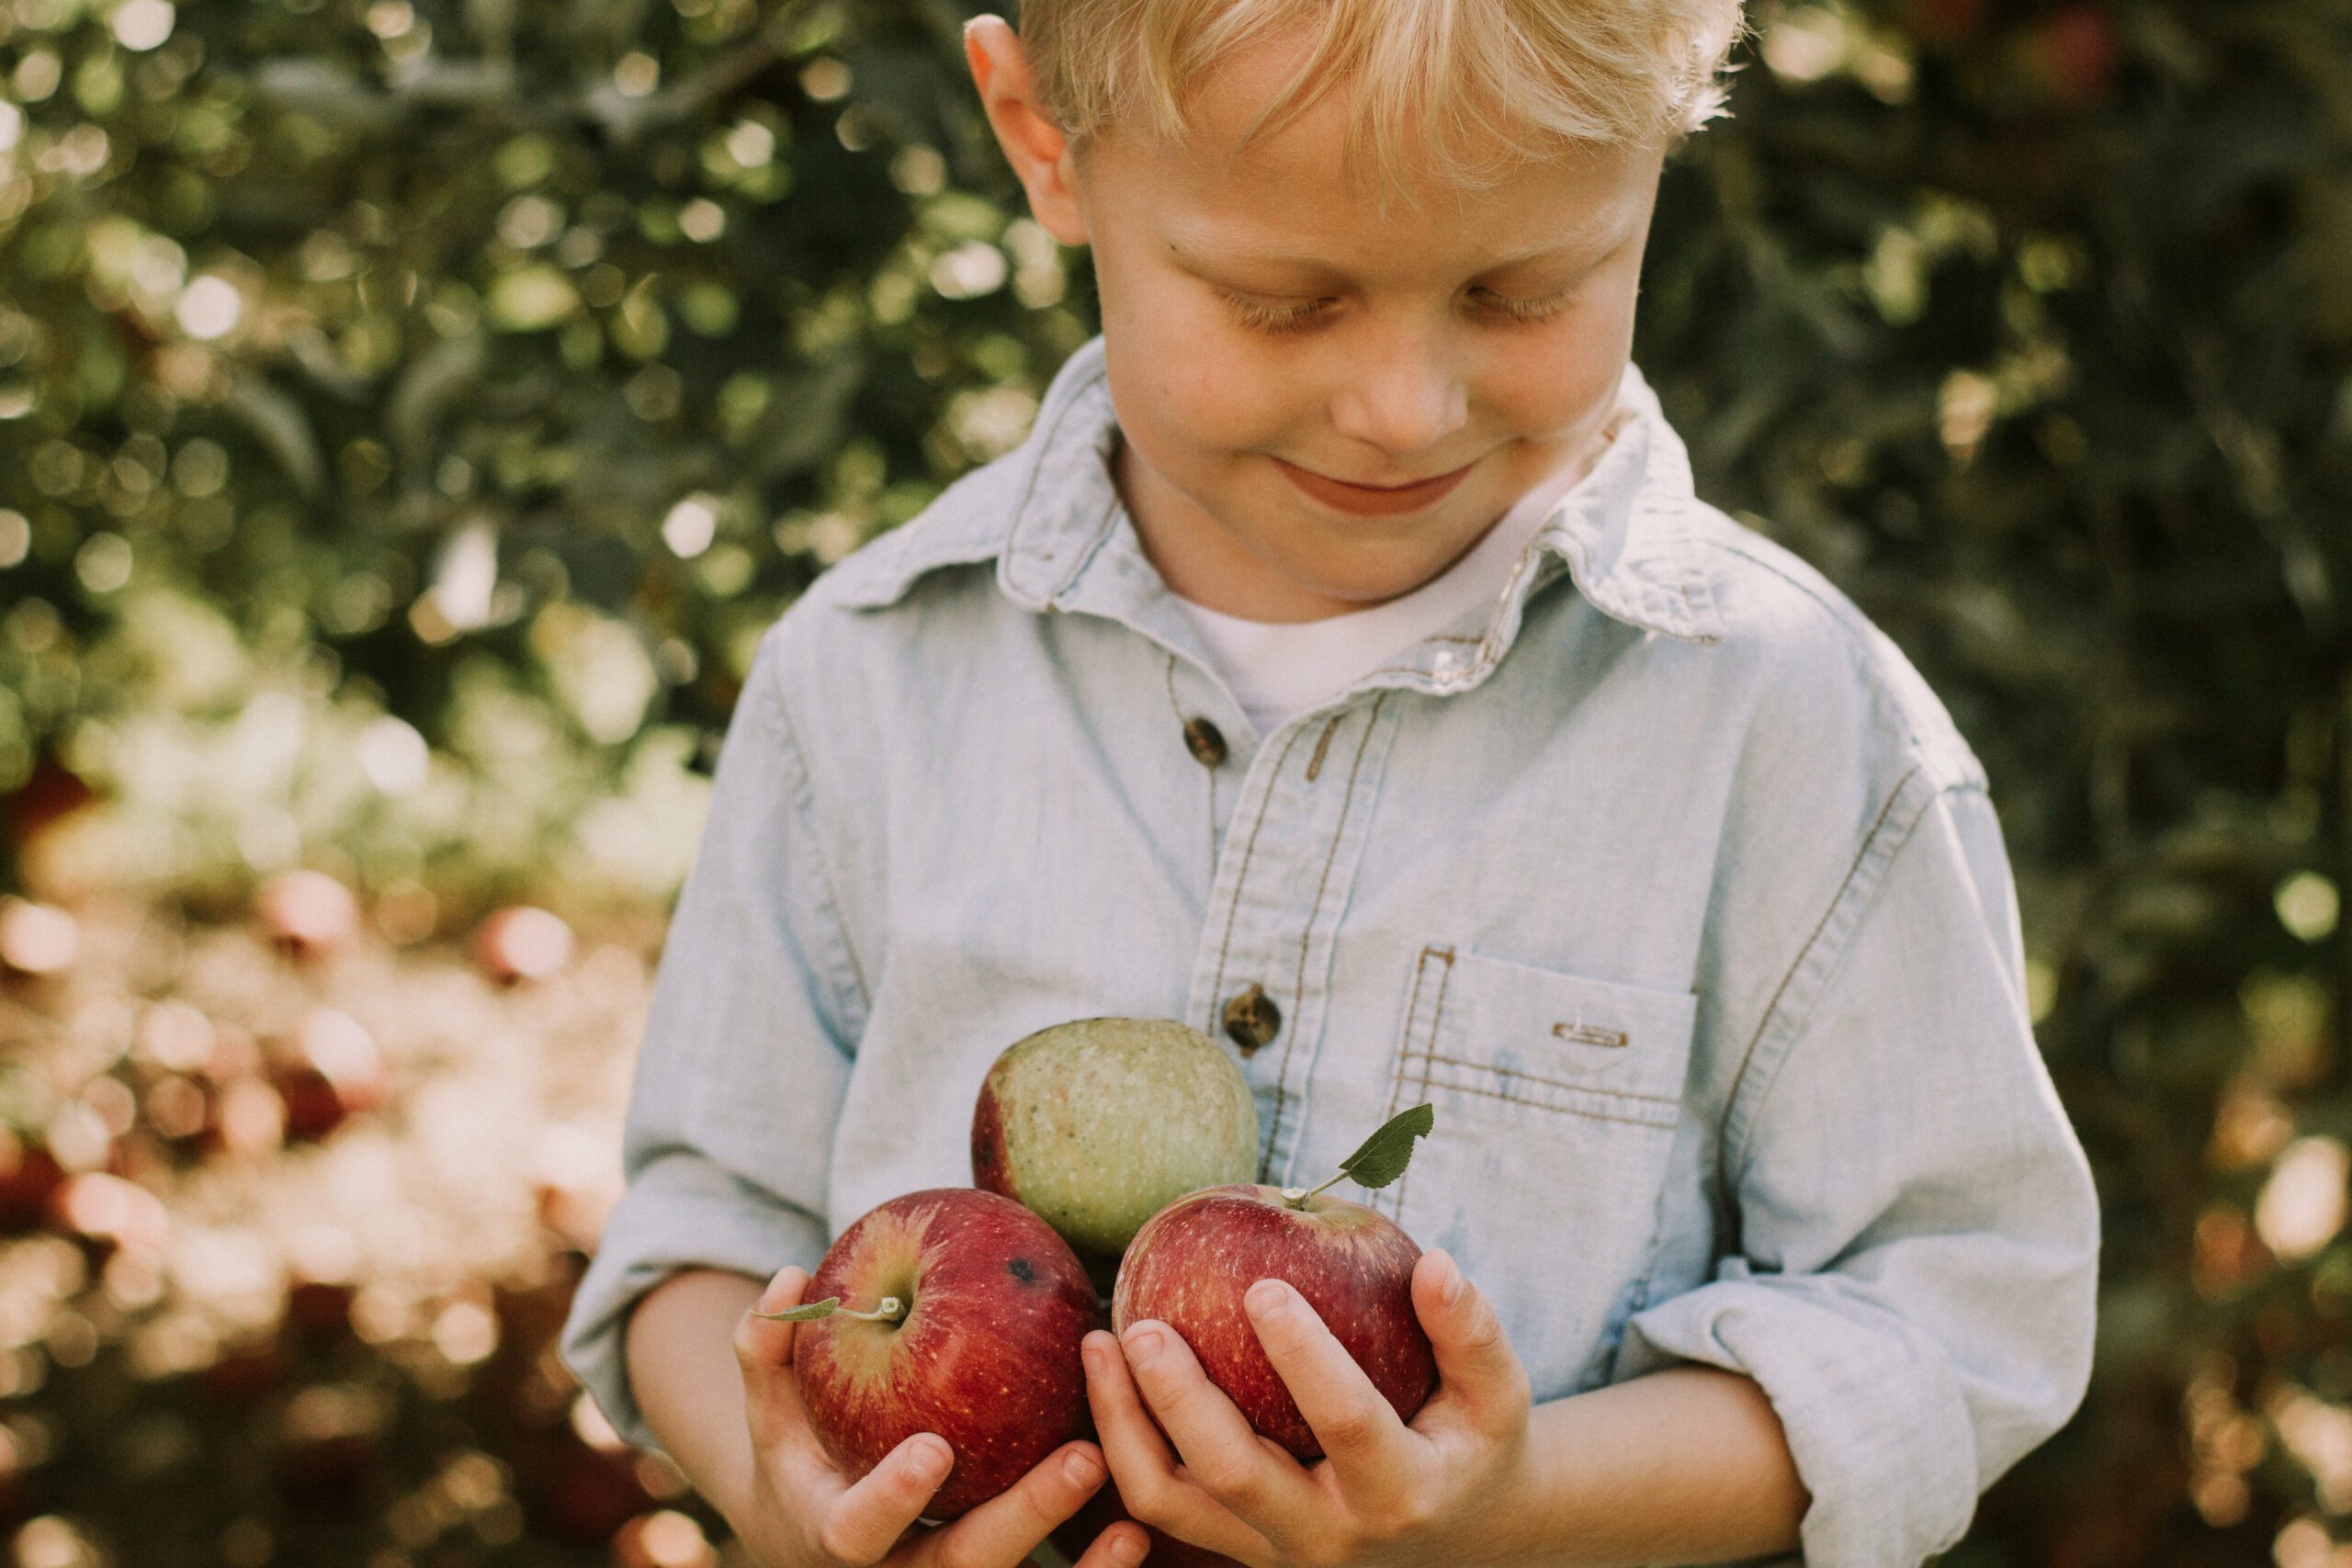 A smiling child in a light shirt holds three apples in an orchard.